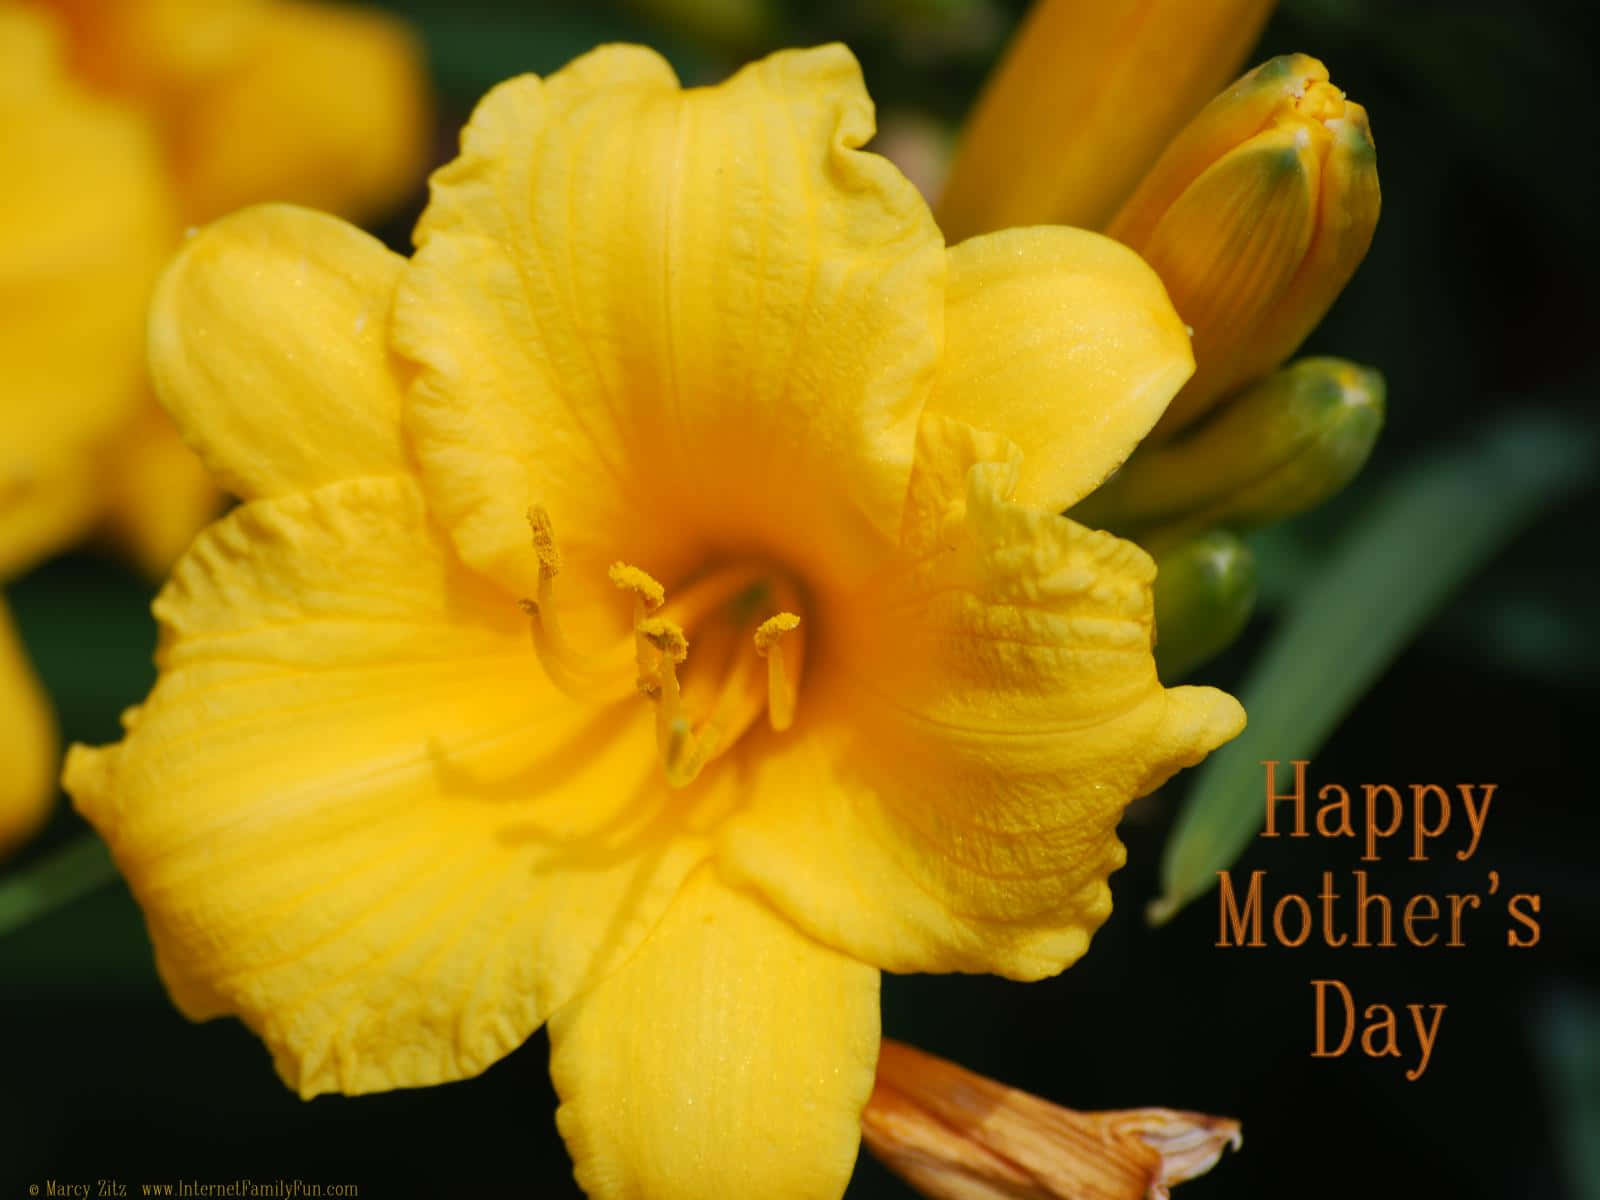 Sending lots of love this Mother's Day!